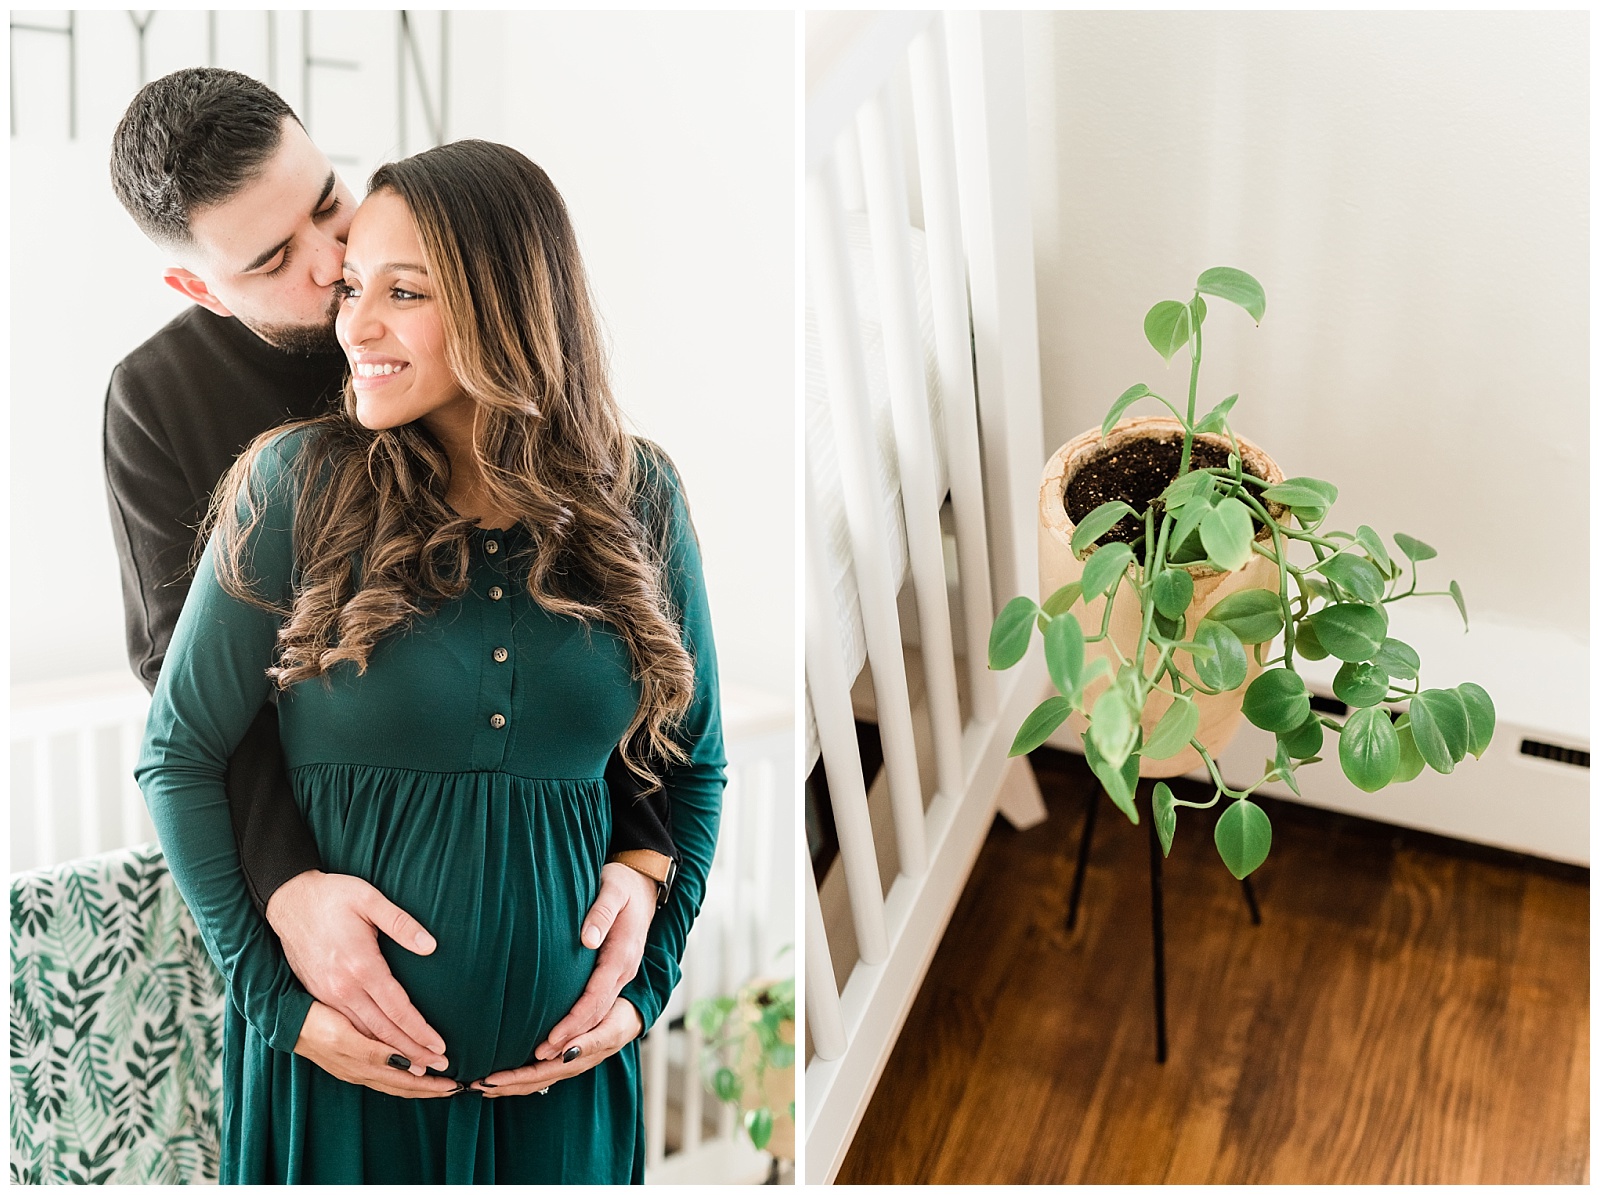 In Home Maternity Session, Nursery, Baby, New Parents, Maternity Shoot, Pregnant, Pregnancy Photos, New Jersey, Photographer, Baby Boy, Jungle Nursery, Plant, Photo